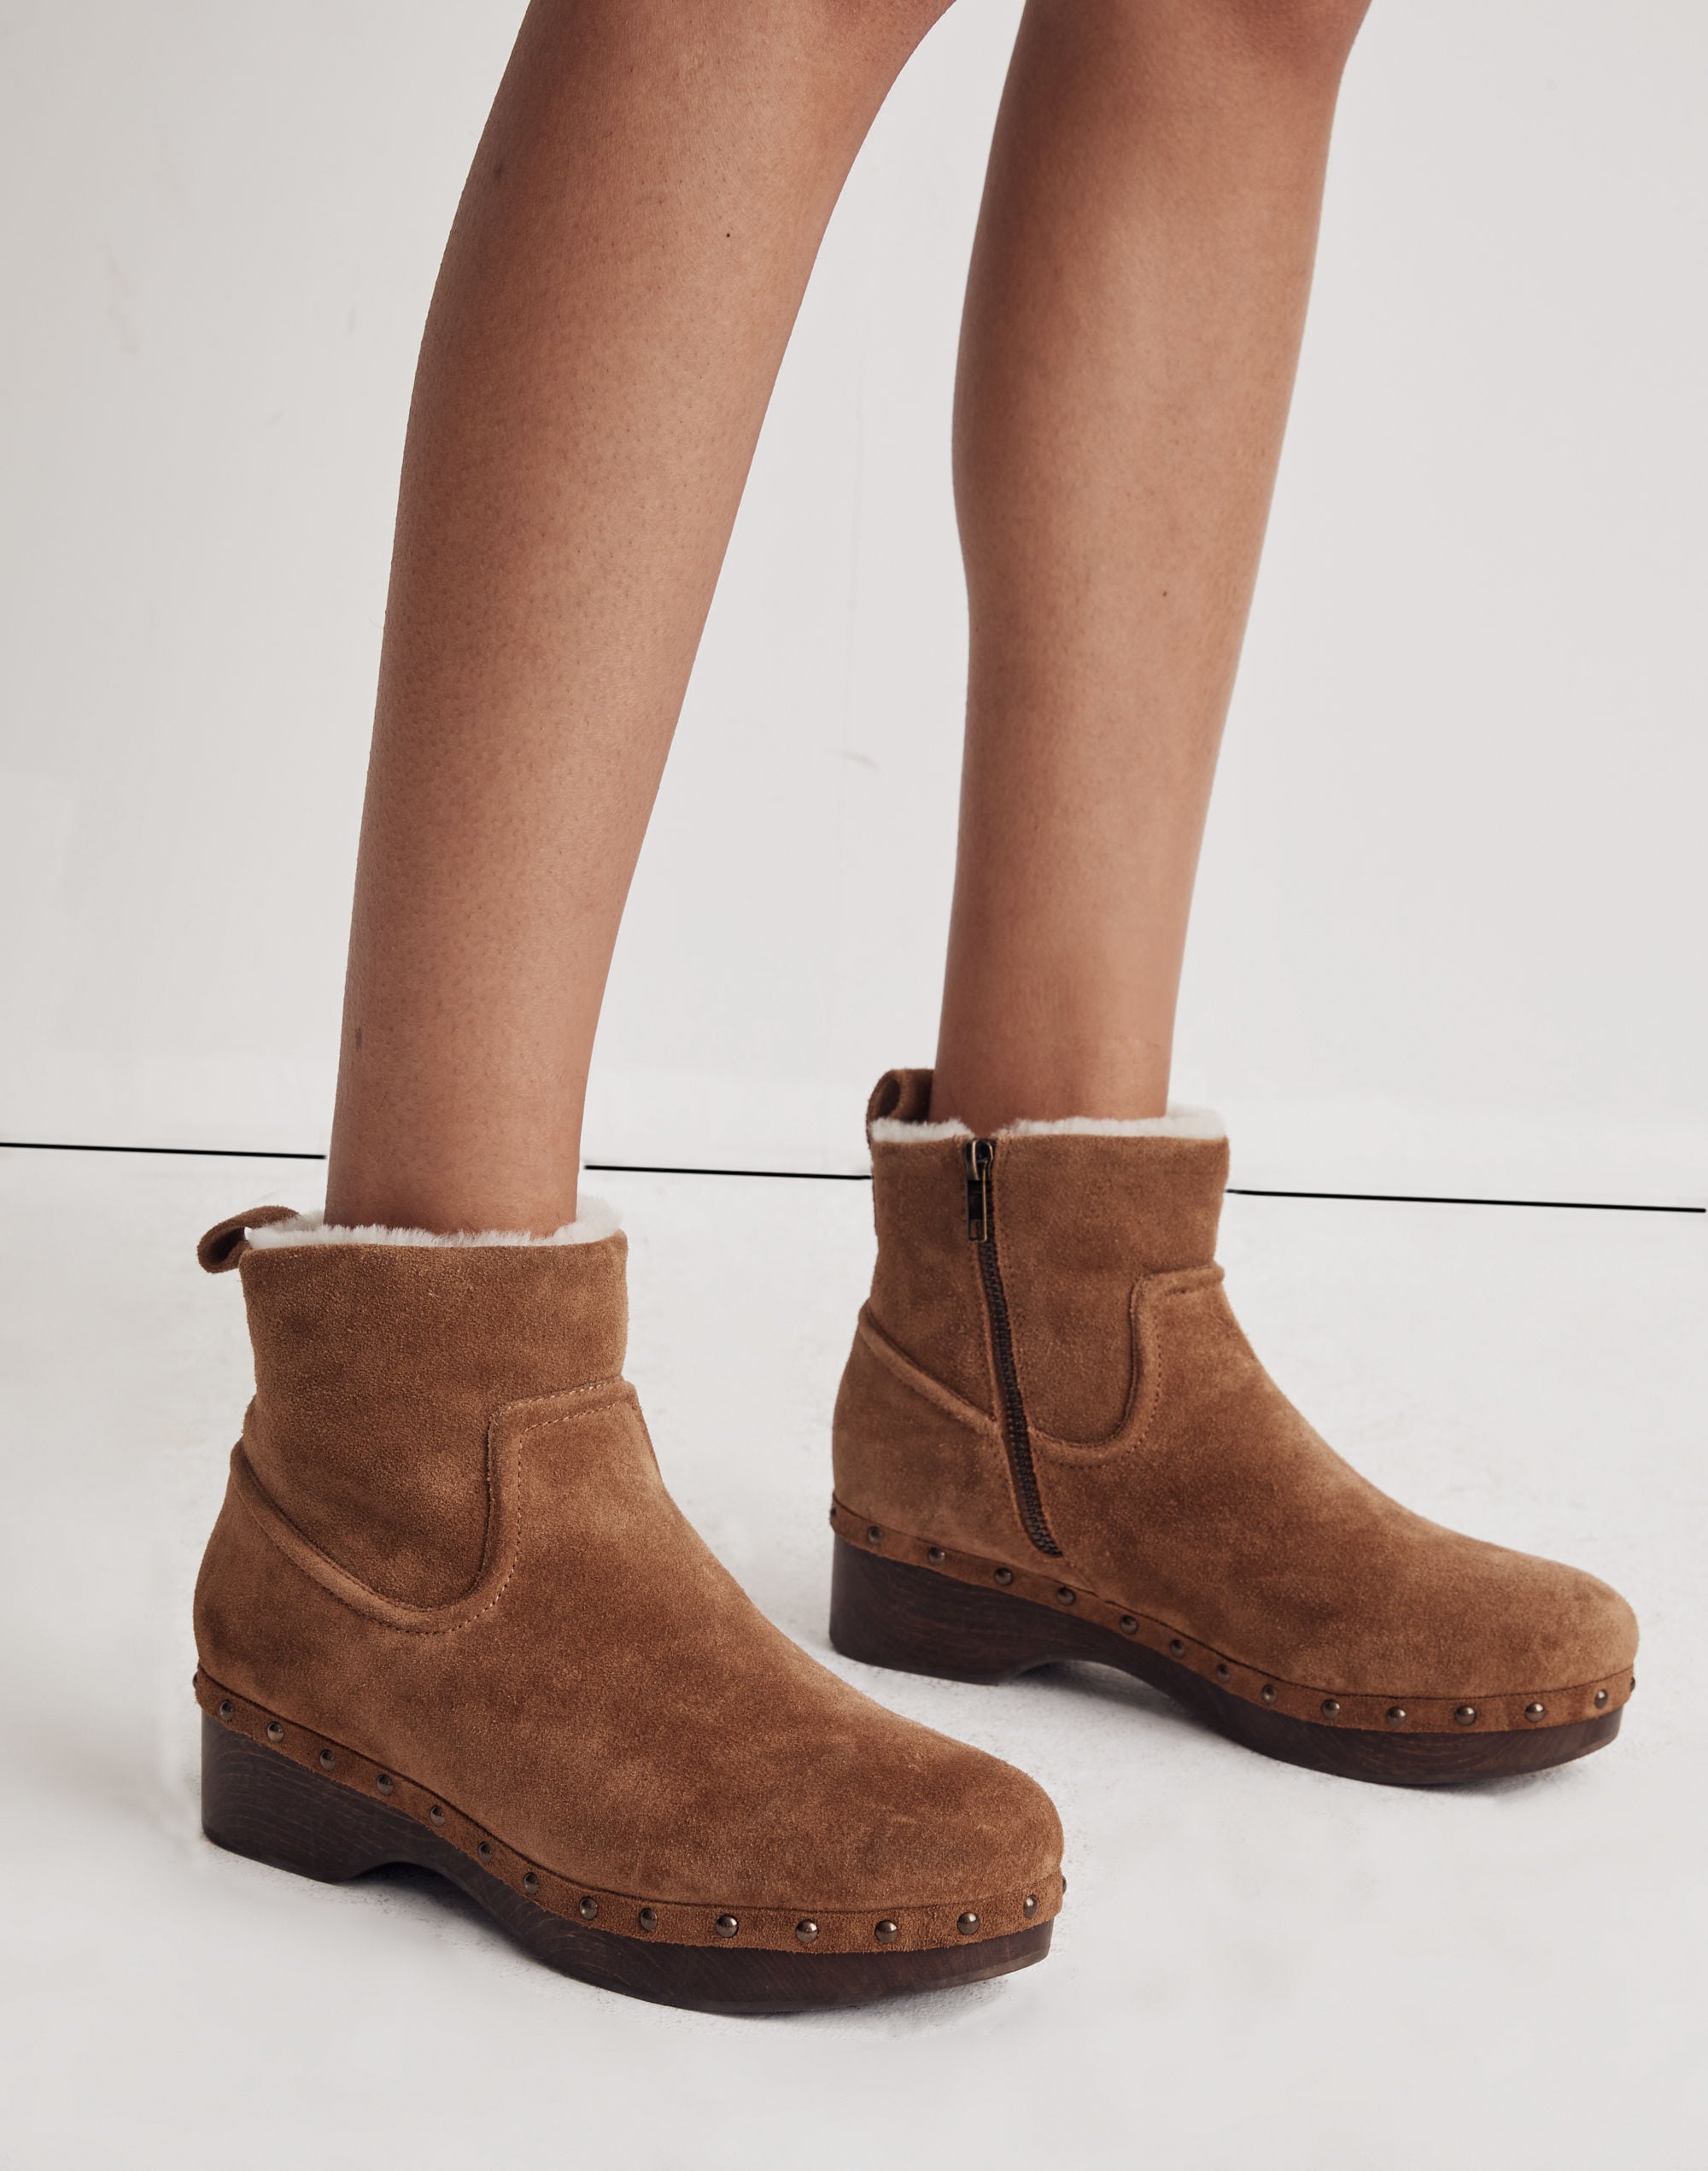 The Marceline Clog Boot Shearling